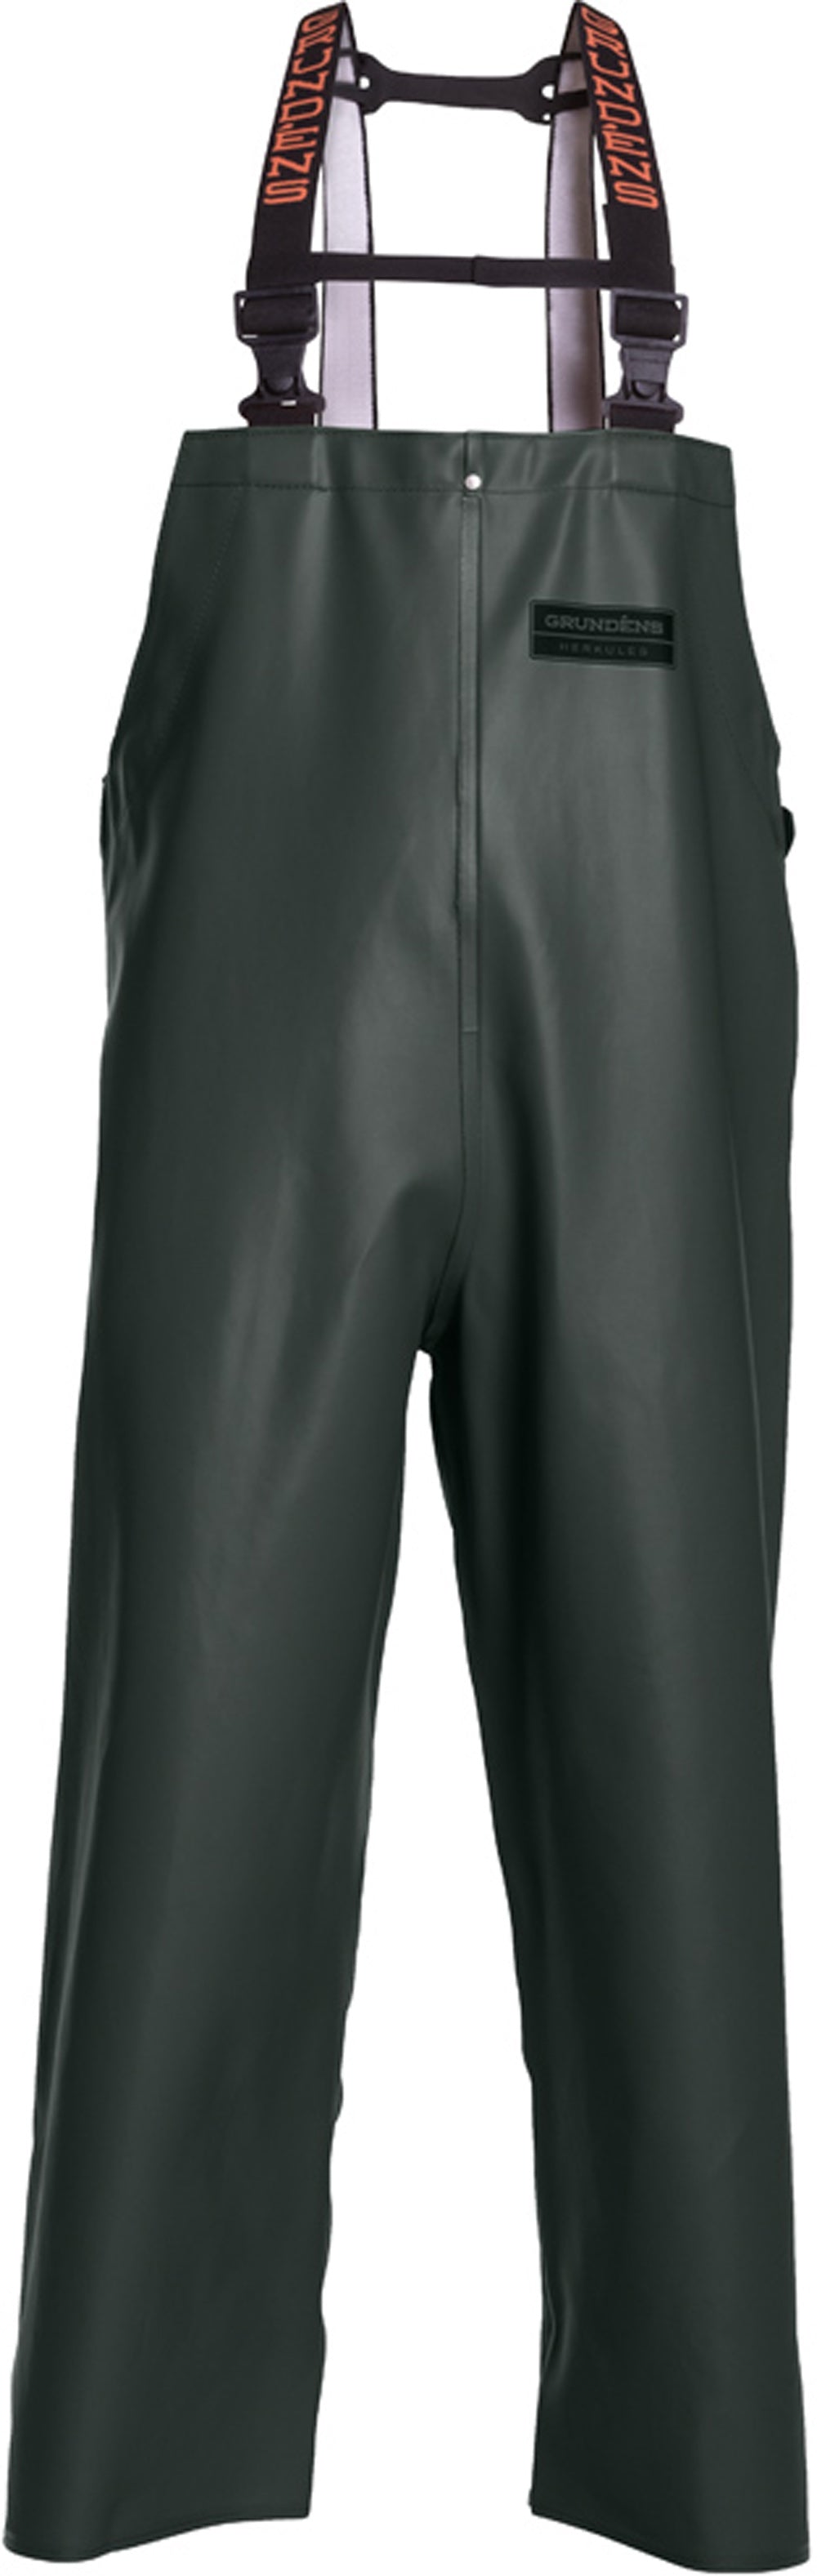 Herkules Tall 16 Bib Pant in Green color from the front view